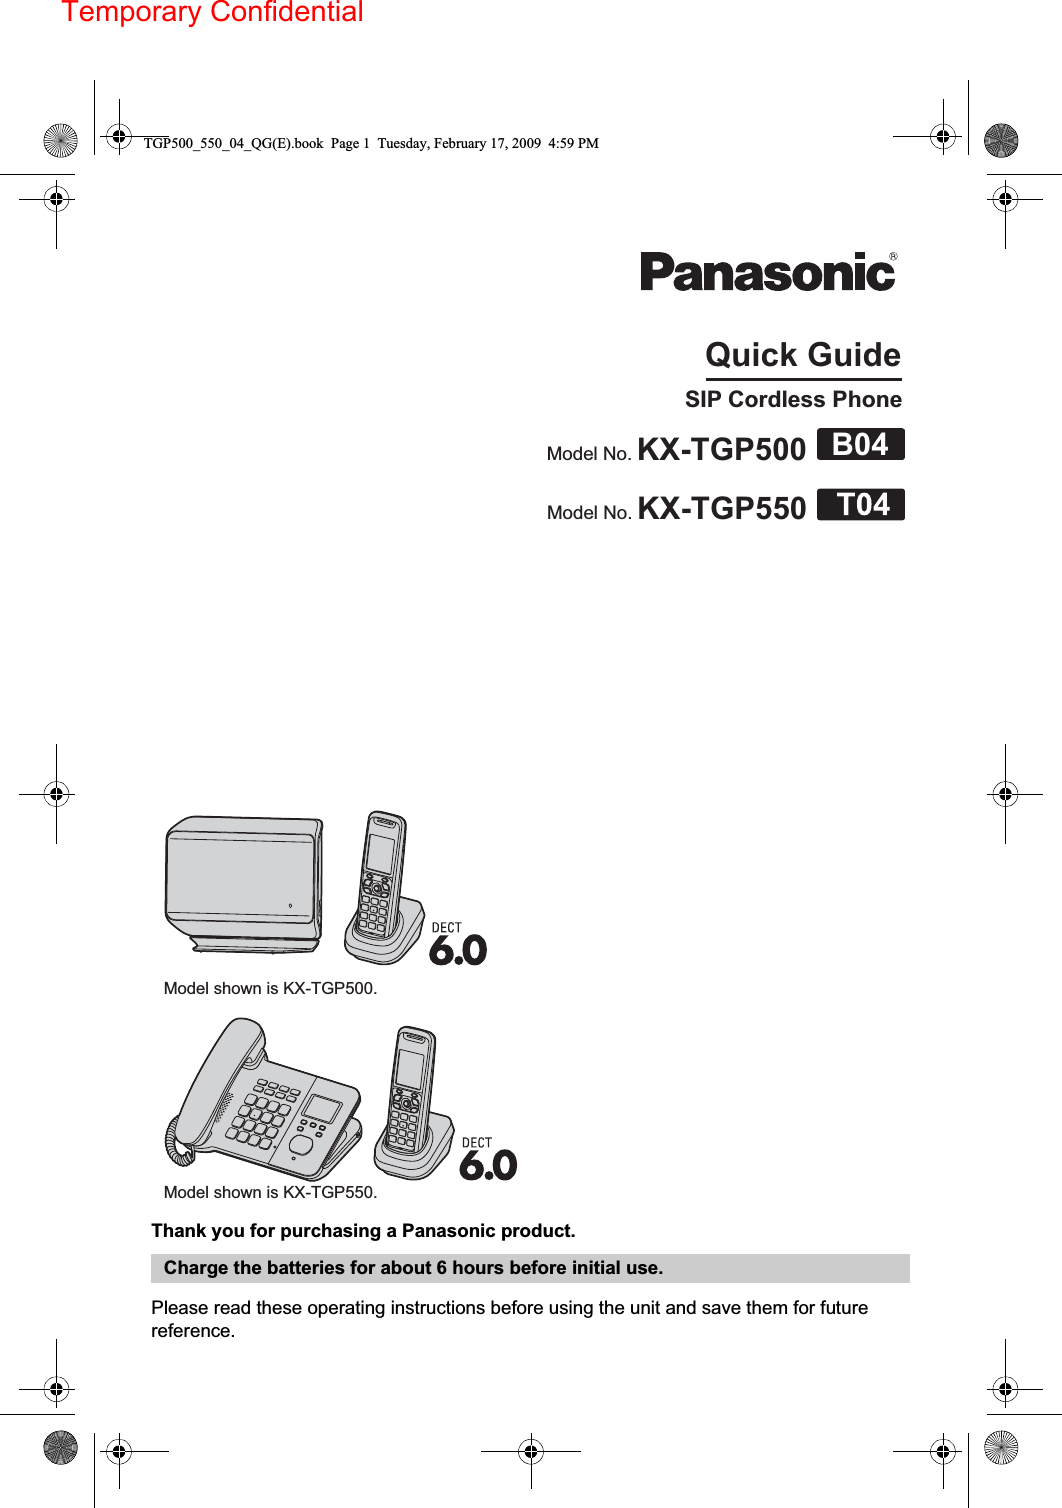 Temporary ConfidentialThank you for purchasing a Panasonic product.Please read these operating instructions before using the unit and save them for future reference.Charge the batteries for about 6 hours before initial use.Quick GuideSIP Cordless PhoneModel No. KX-TGP500Model No. KX-TGP550Model shown is KX-TGP500.B04Model shown is KX-TGP550.TGP500_550_04_QG(E).book  Page 1  Tuesday, February 17, 2009  4:59 PM